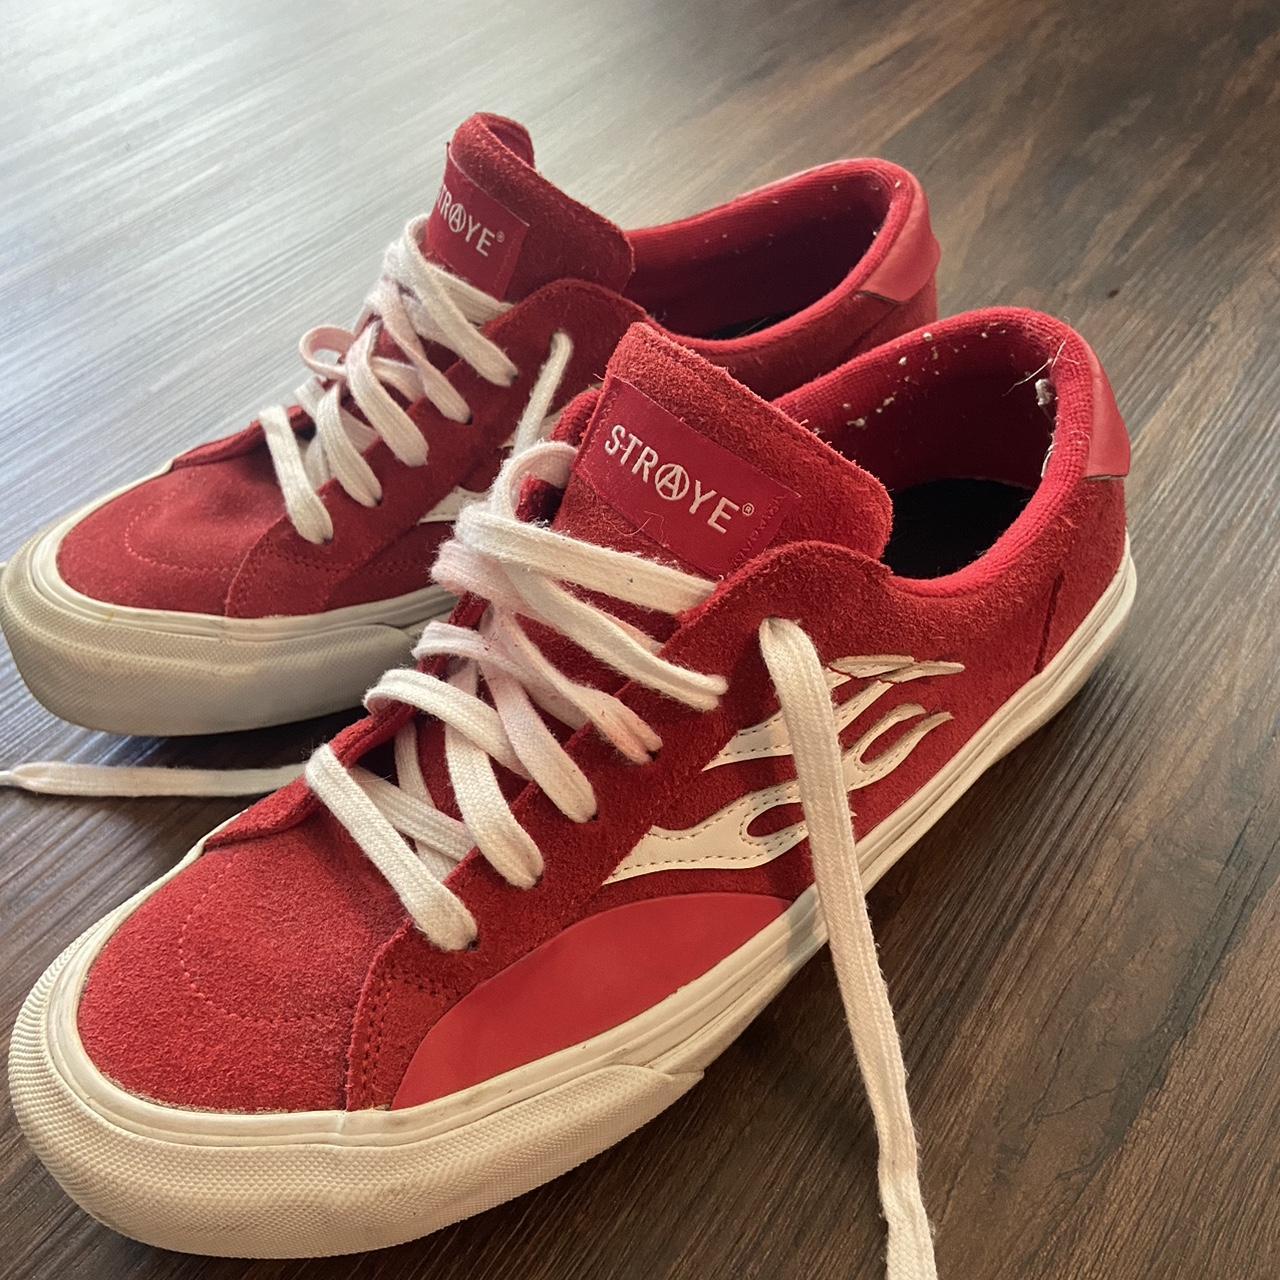 STRAYE Men's Red and White Trainers | Depop